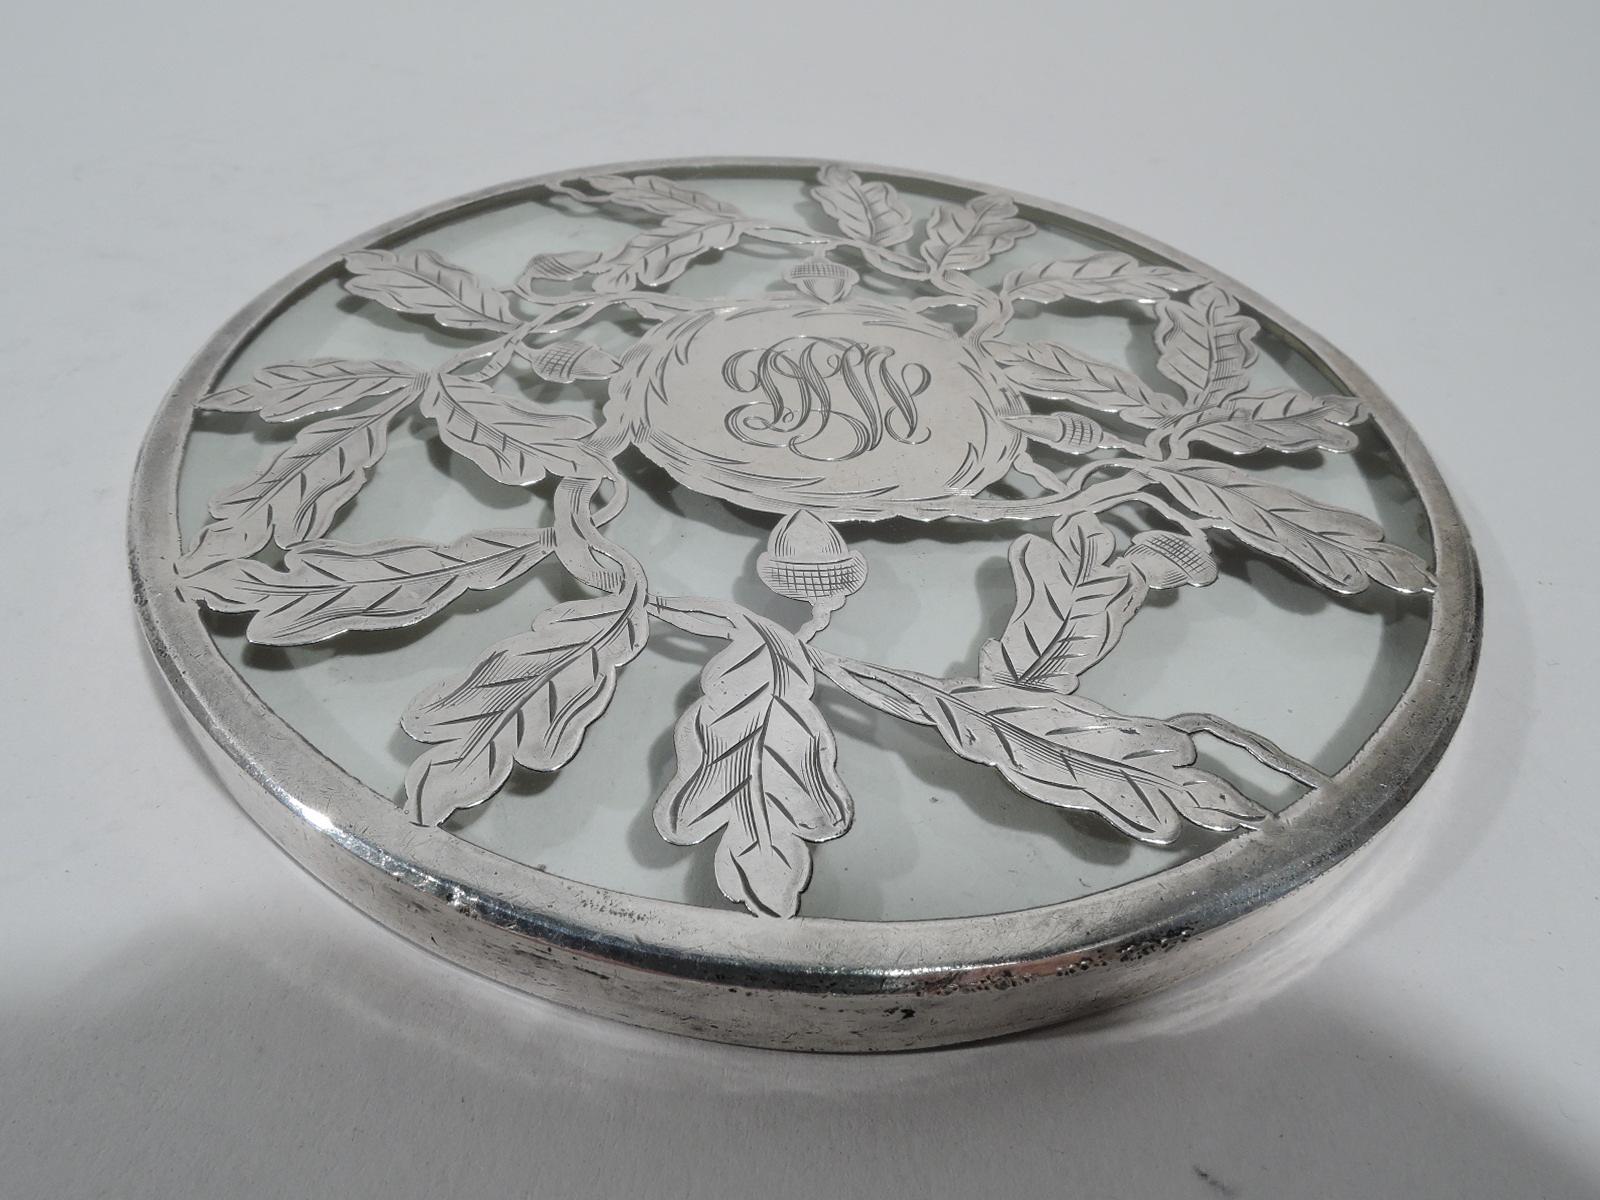 Turn-of-the-century American Art Nouveau glass trivet with engraved silver overlay. Leafing oak branch with acorns surrounding central round frame engraved with interlaced script monogram.